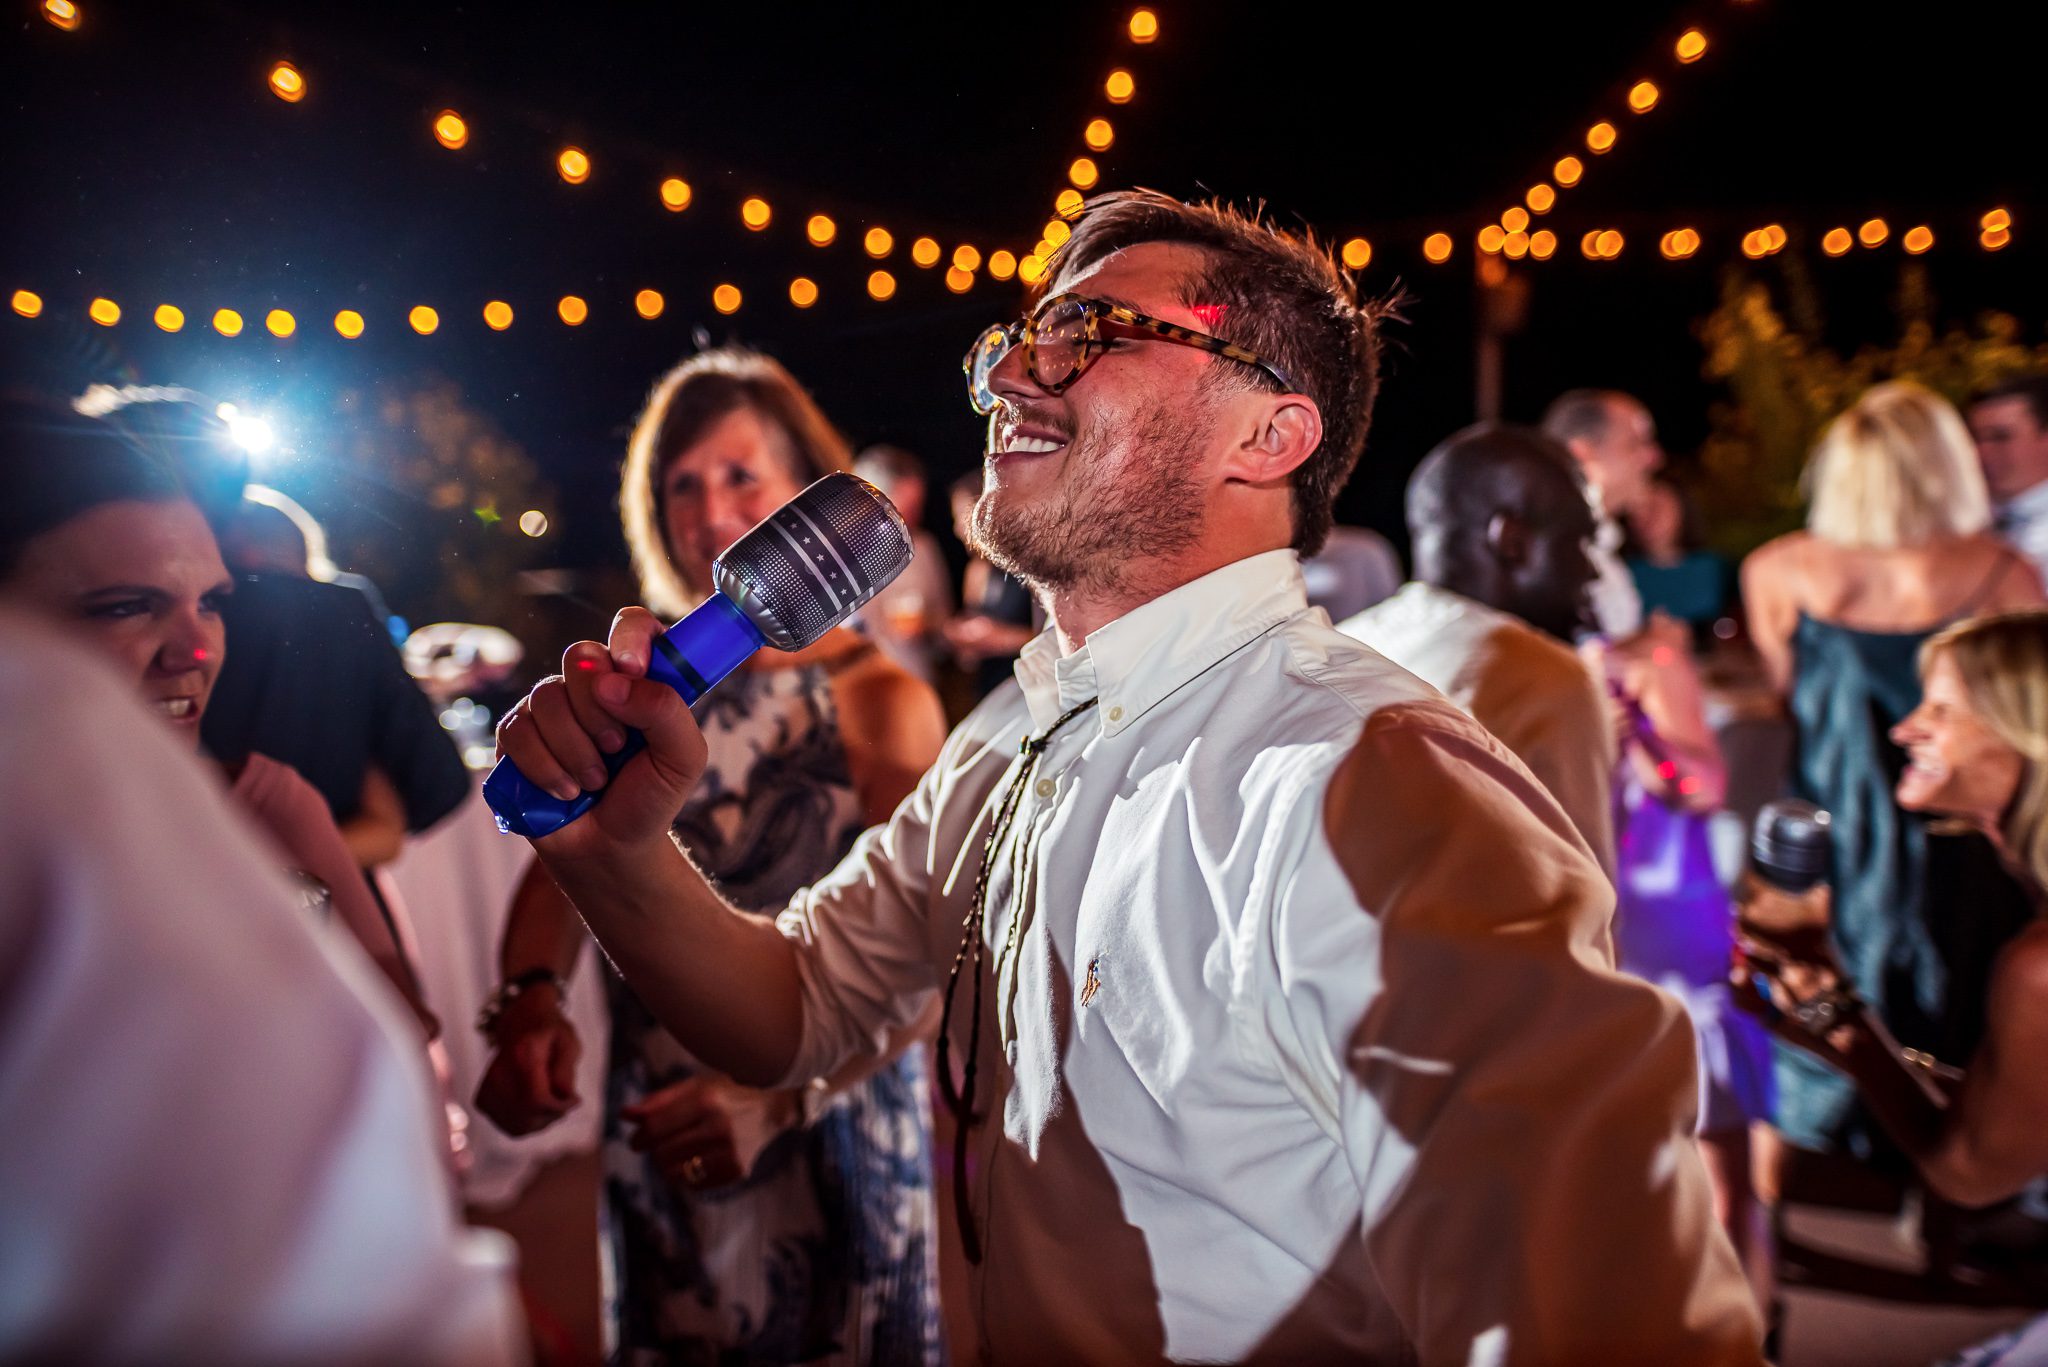 Guest sings into microphone at wedding reception party